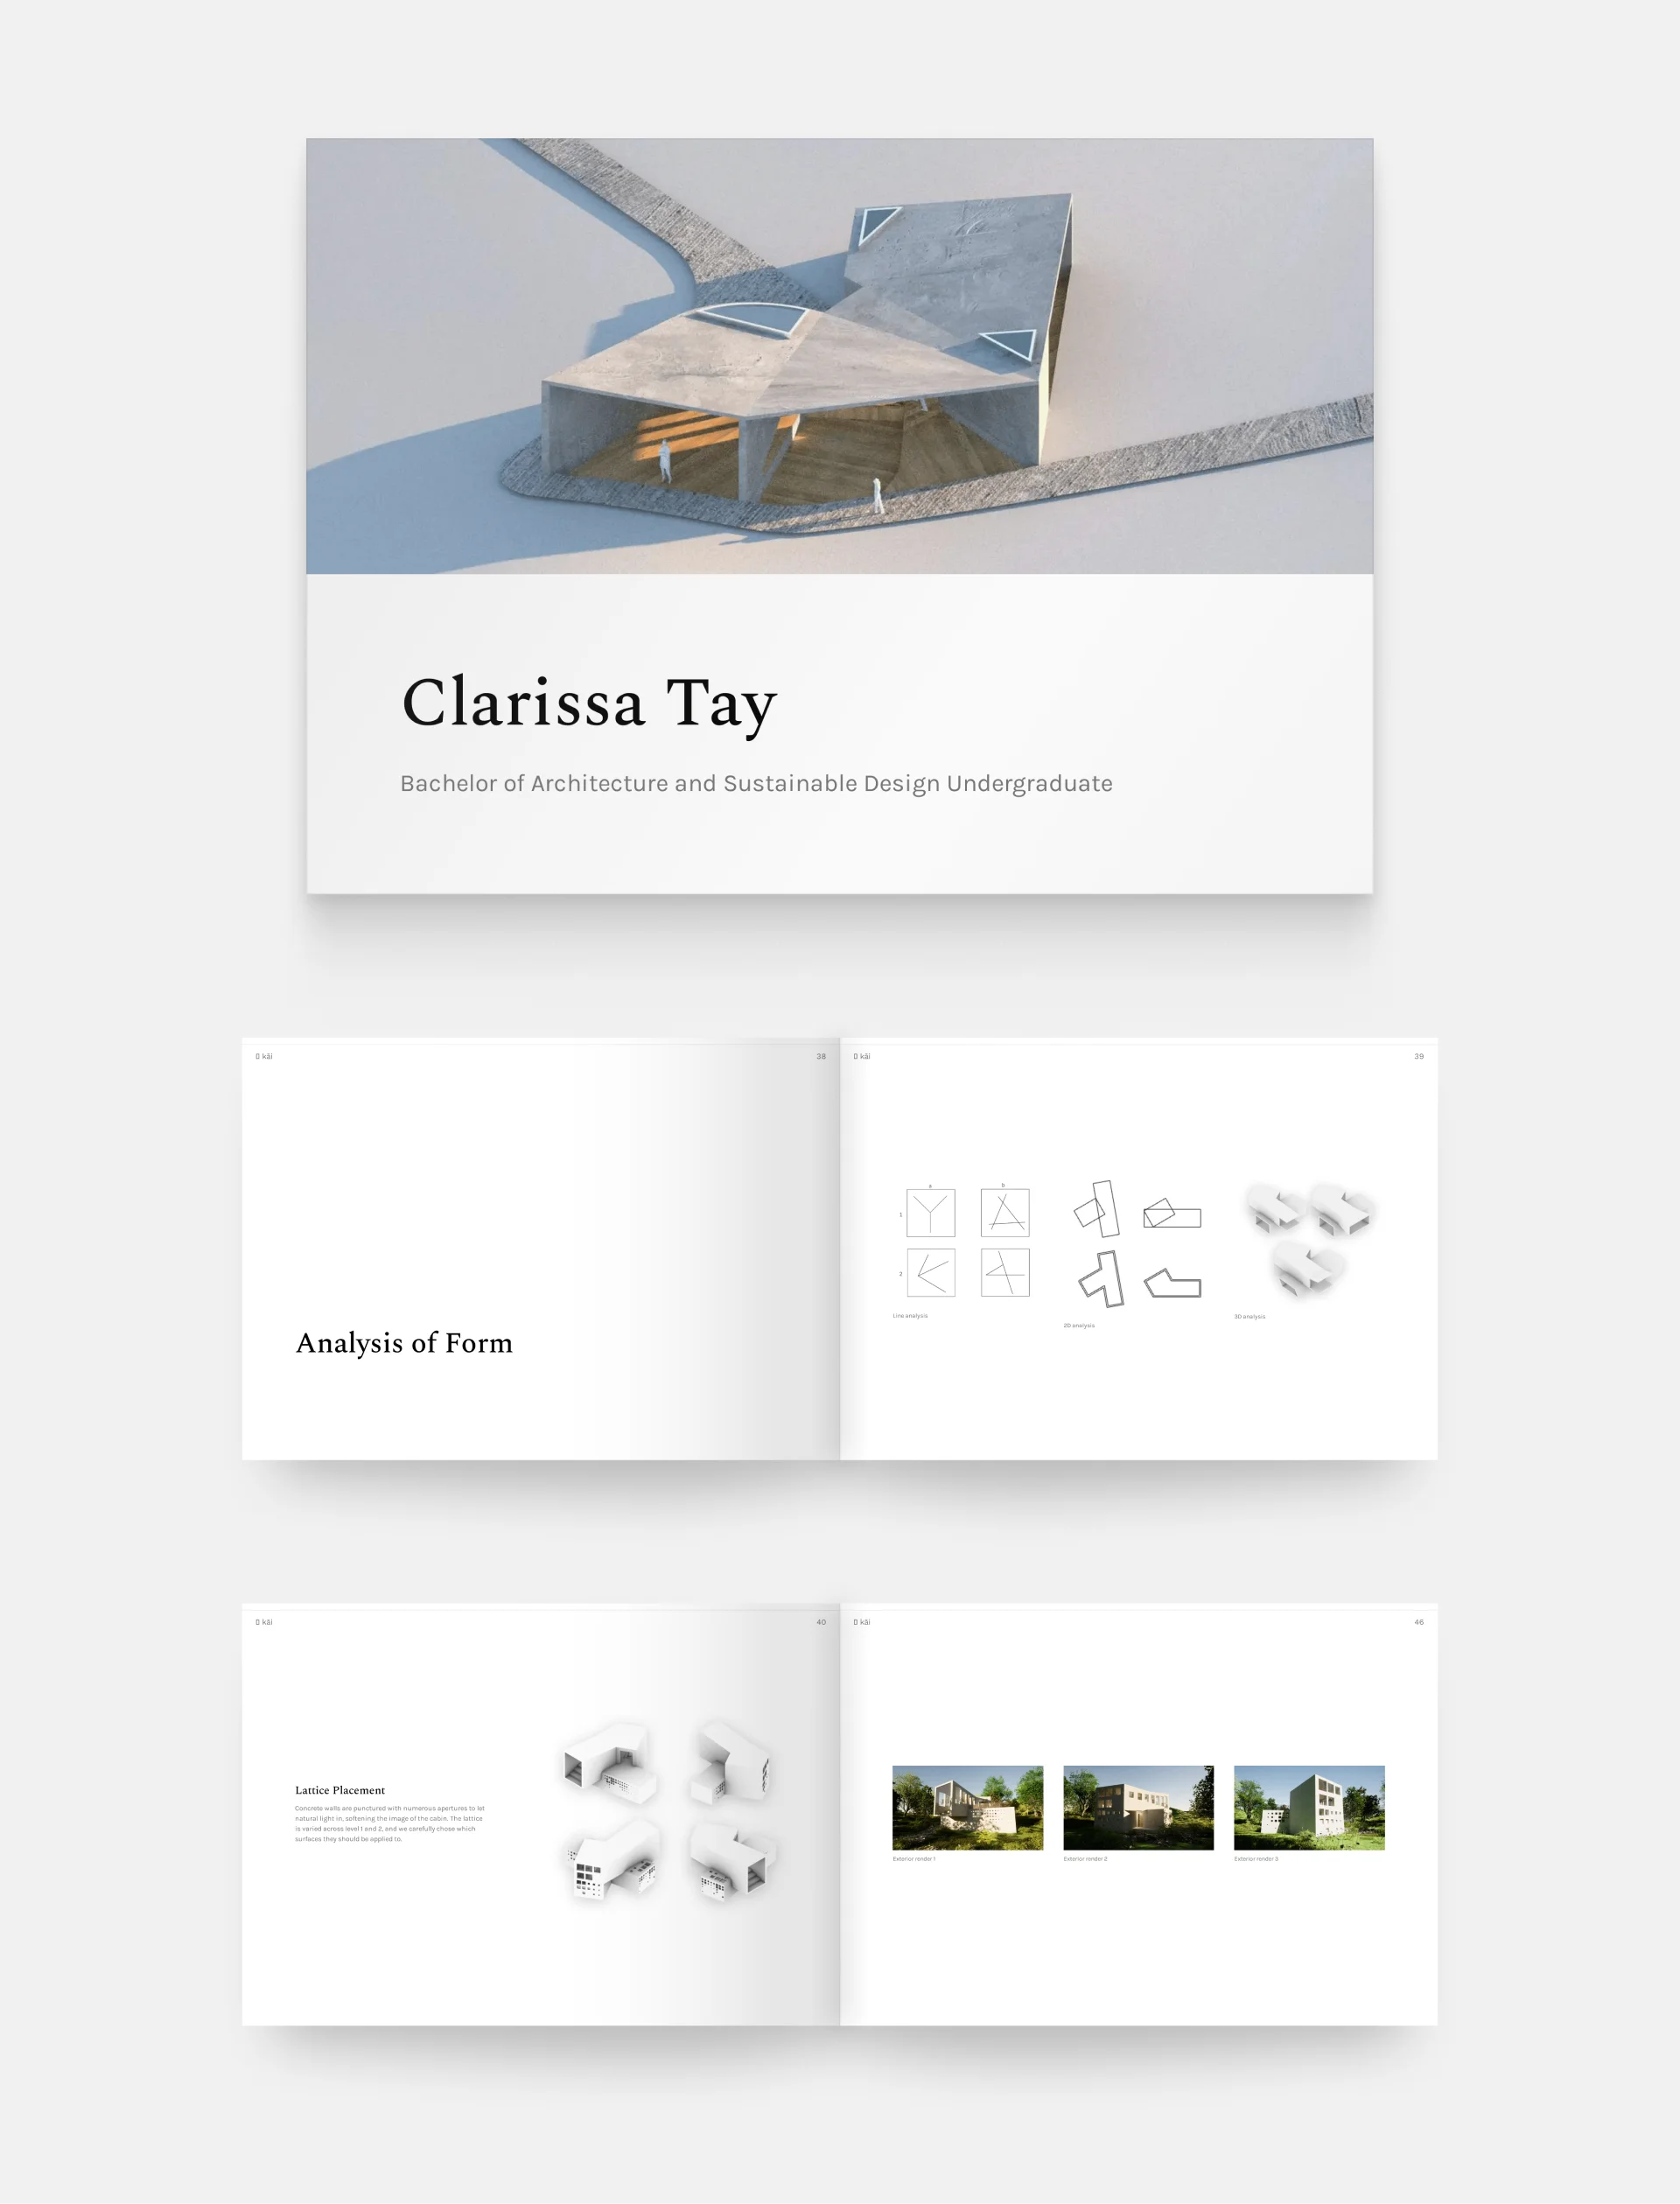 4 PDF pages and the interior design portfolio cover created by Clarissa Tay